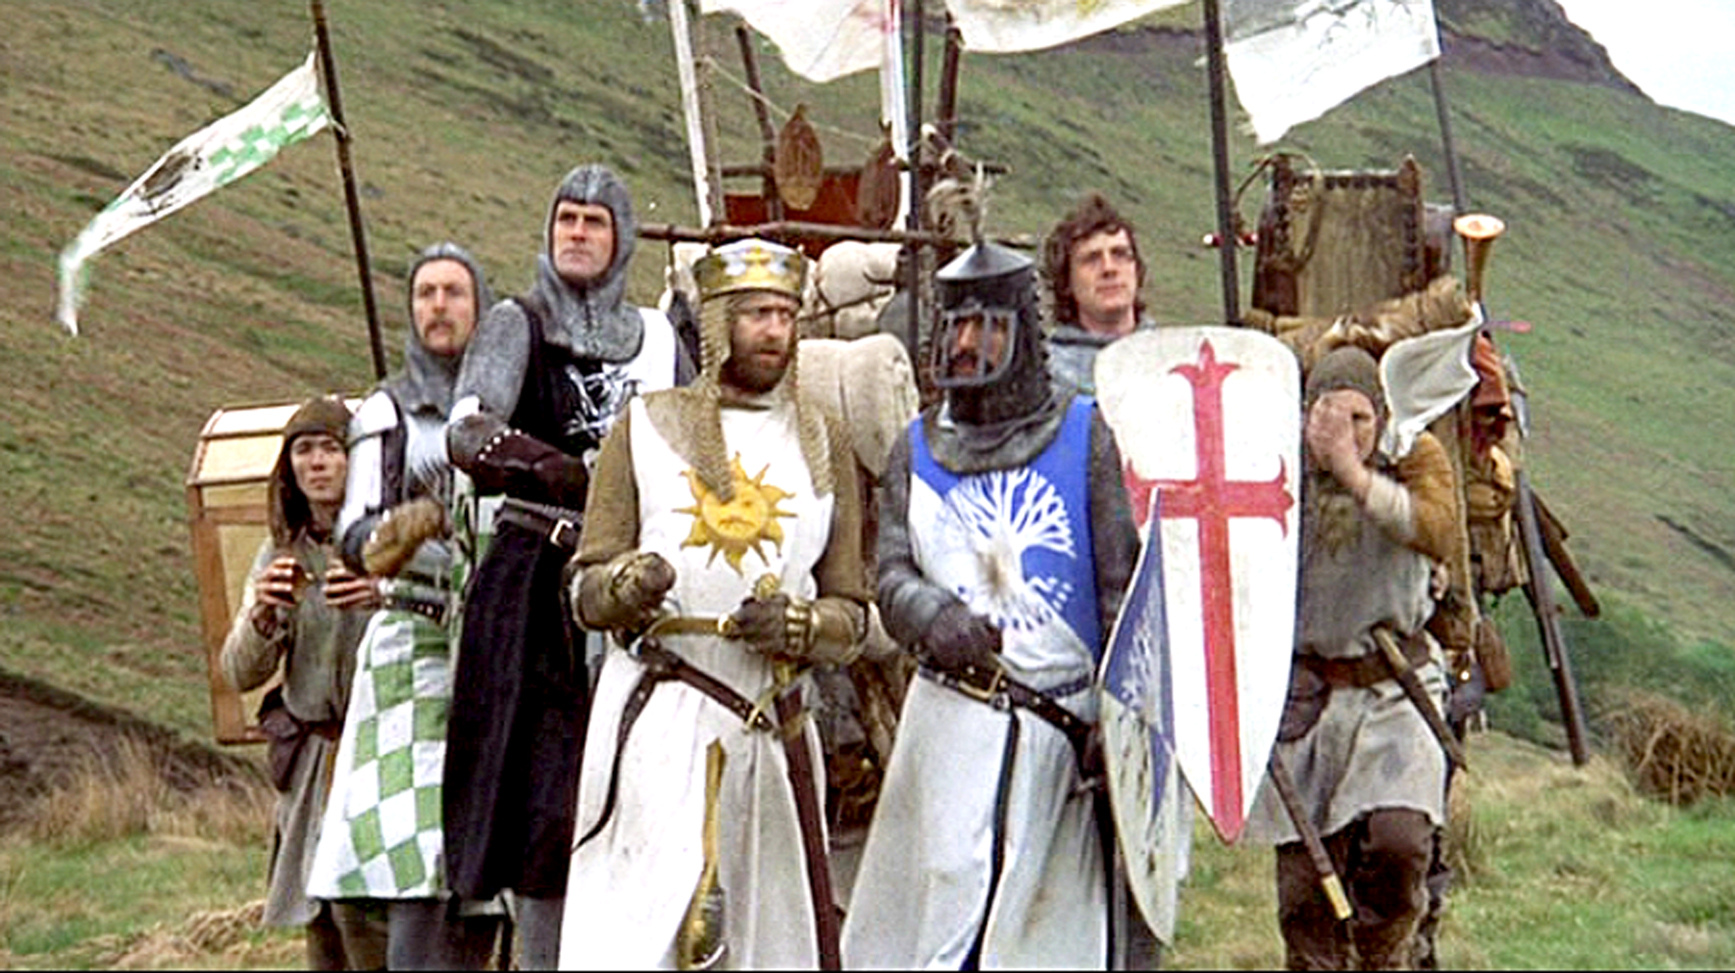 Geek insider, geekinsider, geekinsider. Com,, monty python: the global phenomenon that continues to thrive, entertainment